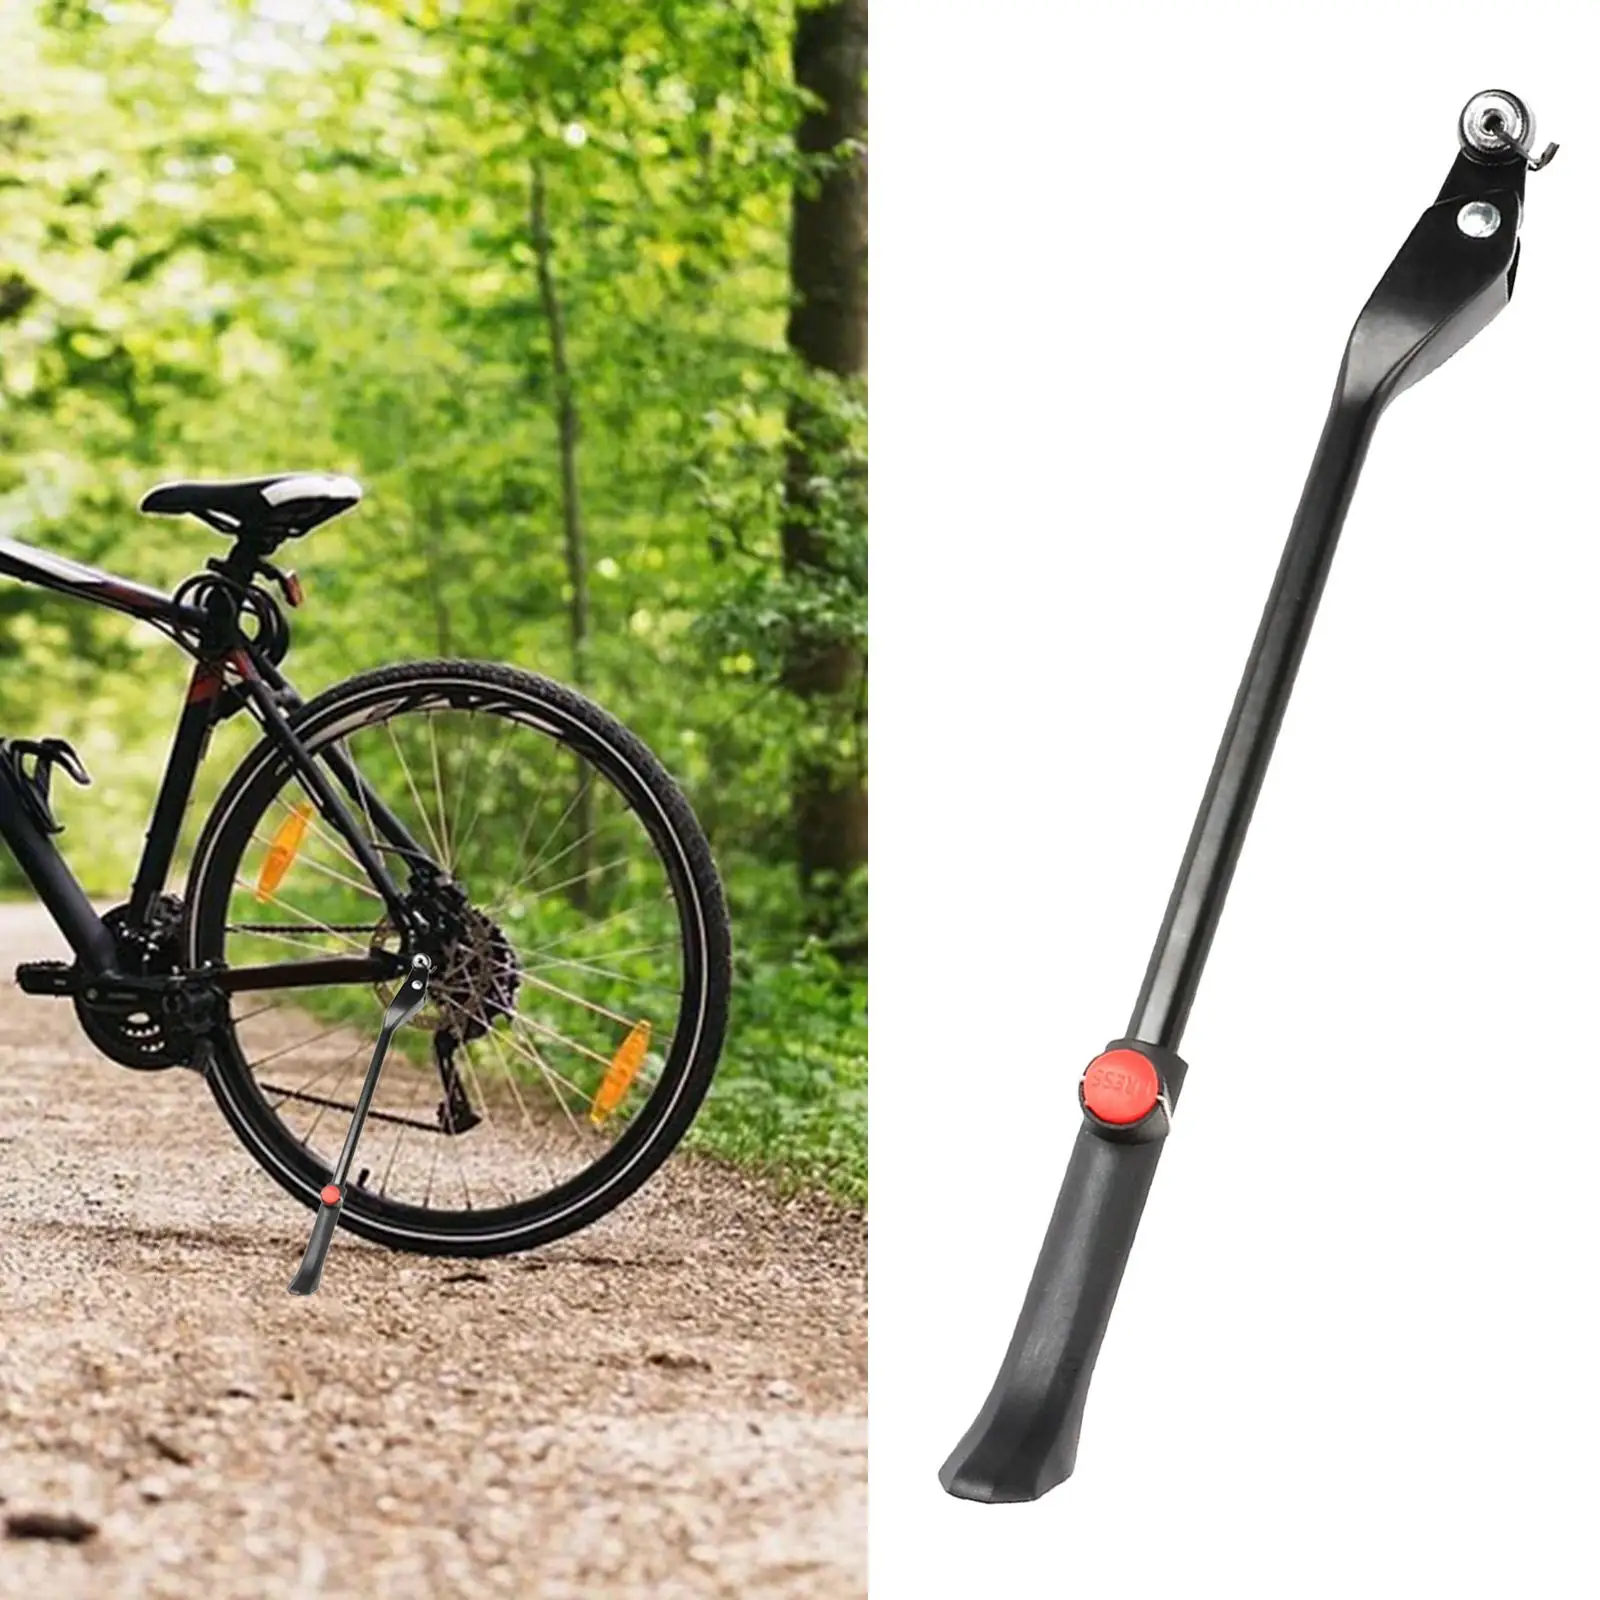 Adjustable Bicycle Kickstand Bike Side Kick Stand Non-Slip Cycling Accessories Foot Support